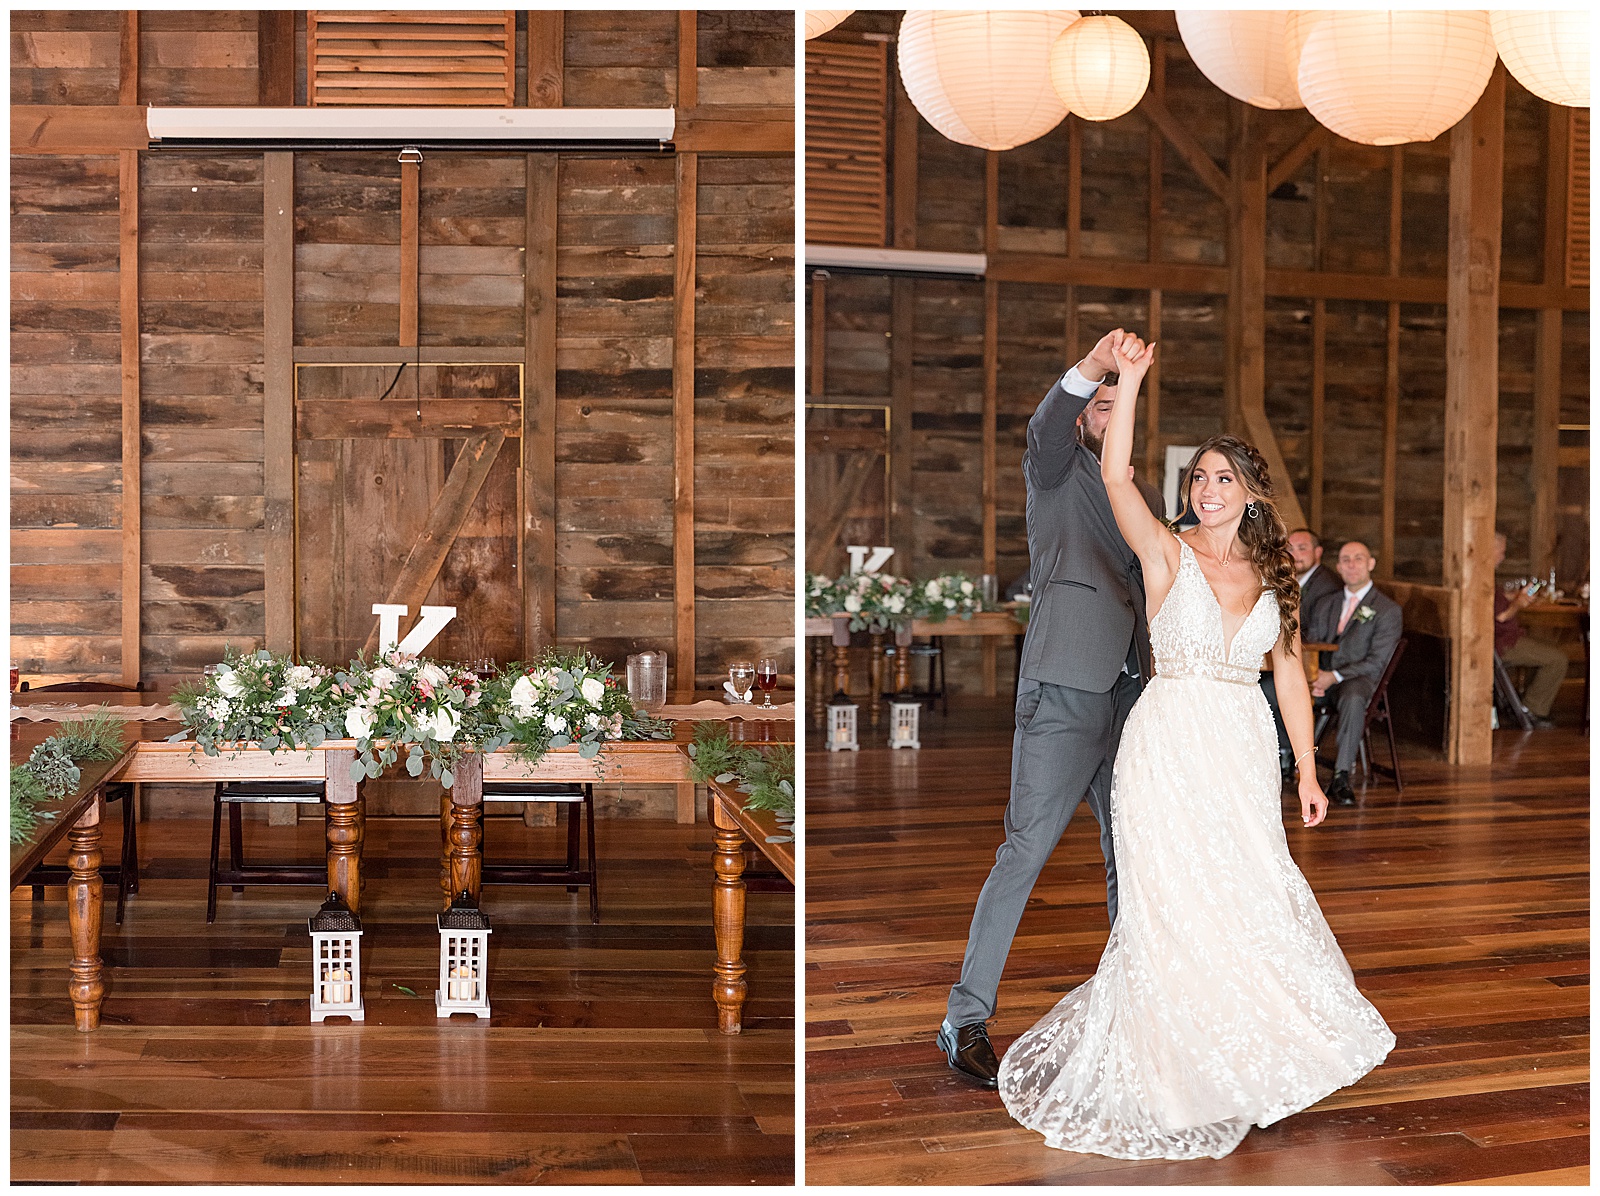 reception and first dance of bride and groom in Loft at Country Barn 